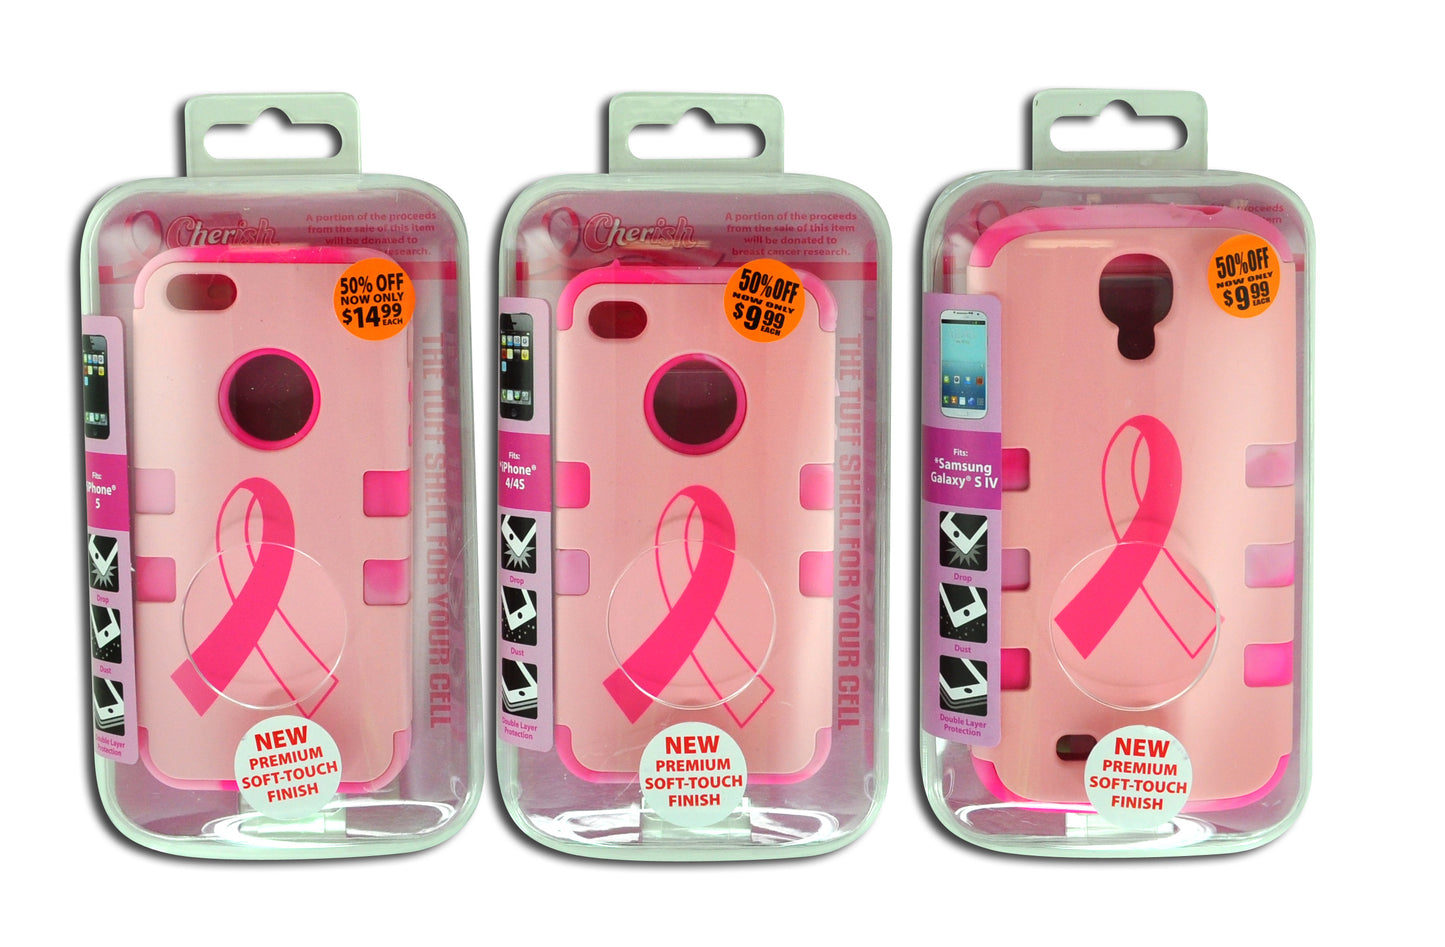 ITEM NUMBER 020160L PINK PRINTED CELL CASE - STORE SURPLUS NO DISPLAY 3 PIECES PER PACK